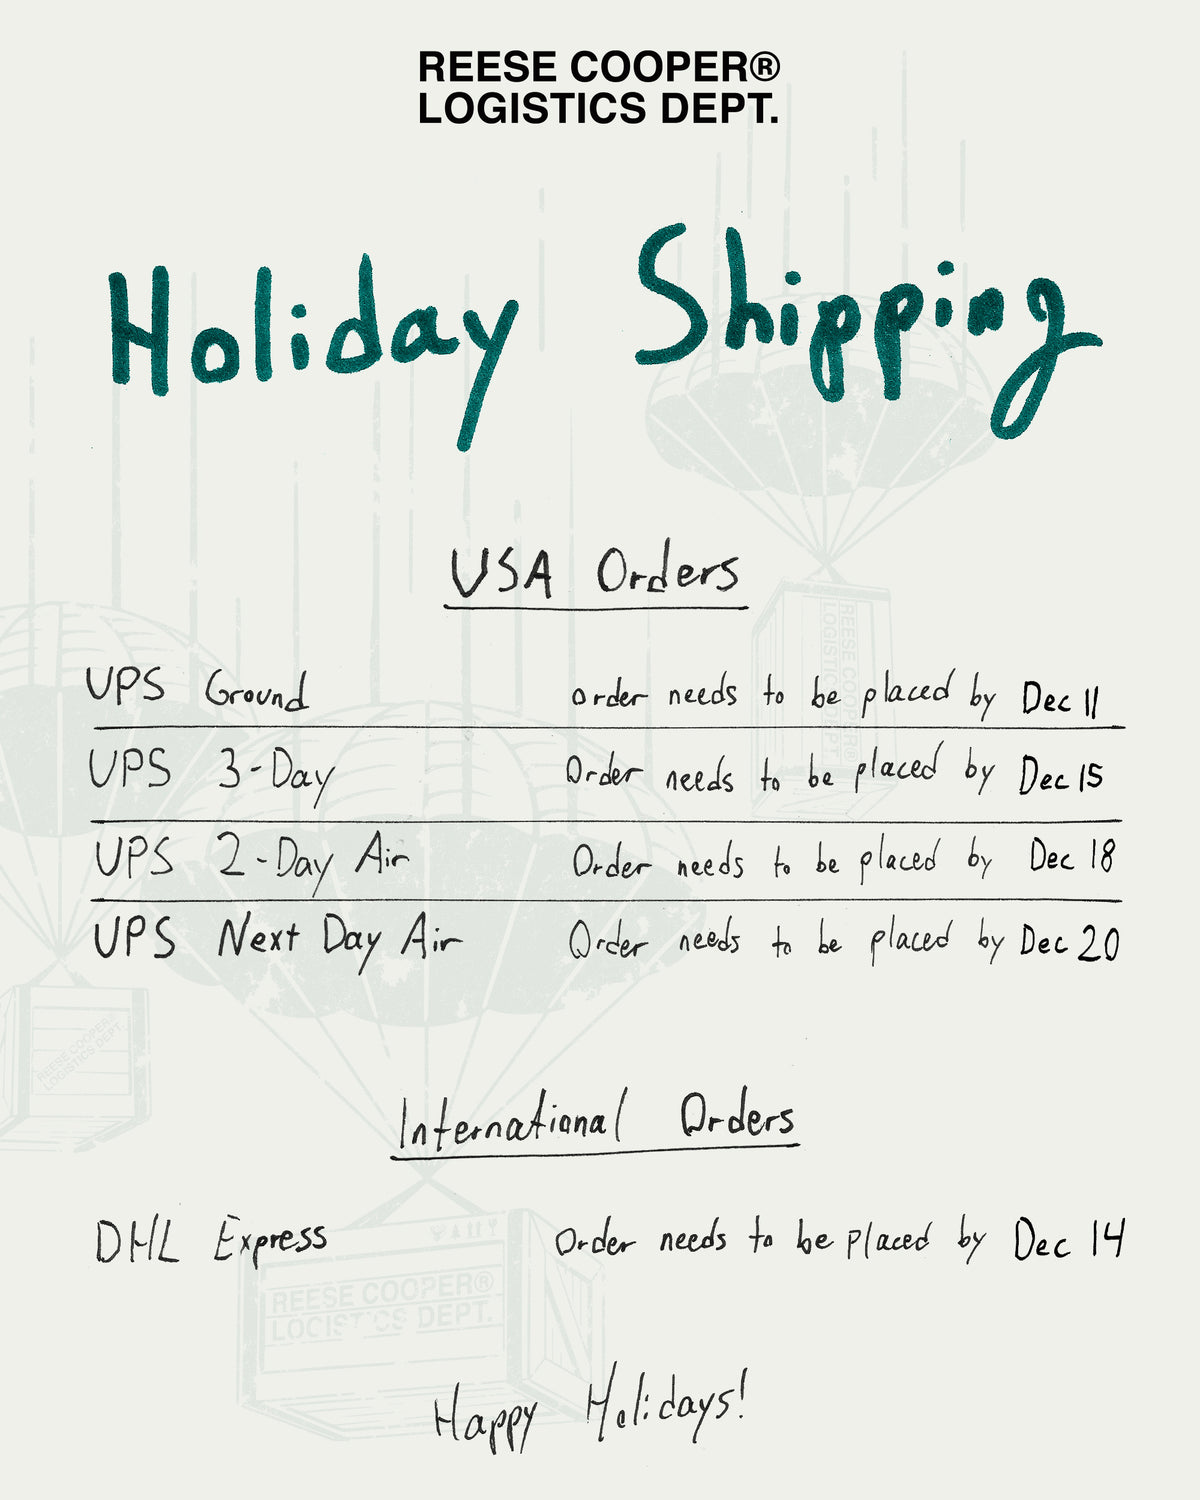 2023 Holiday Shipping info